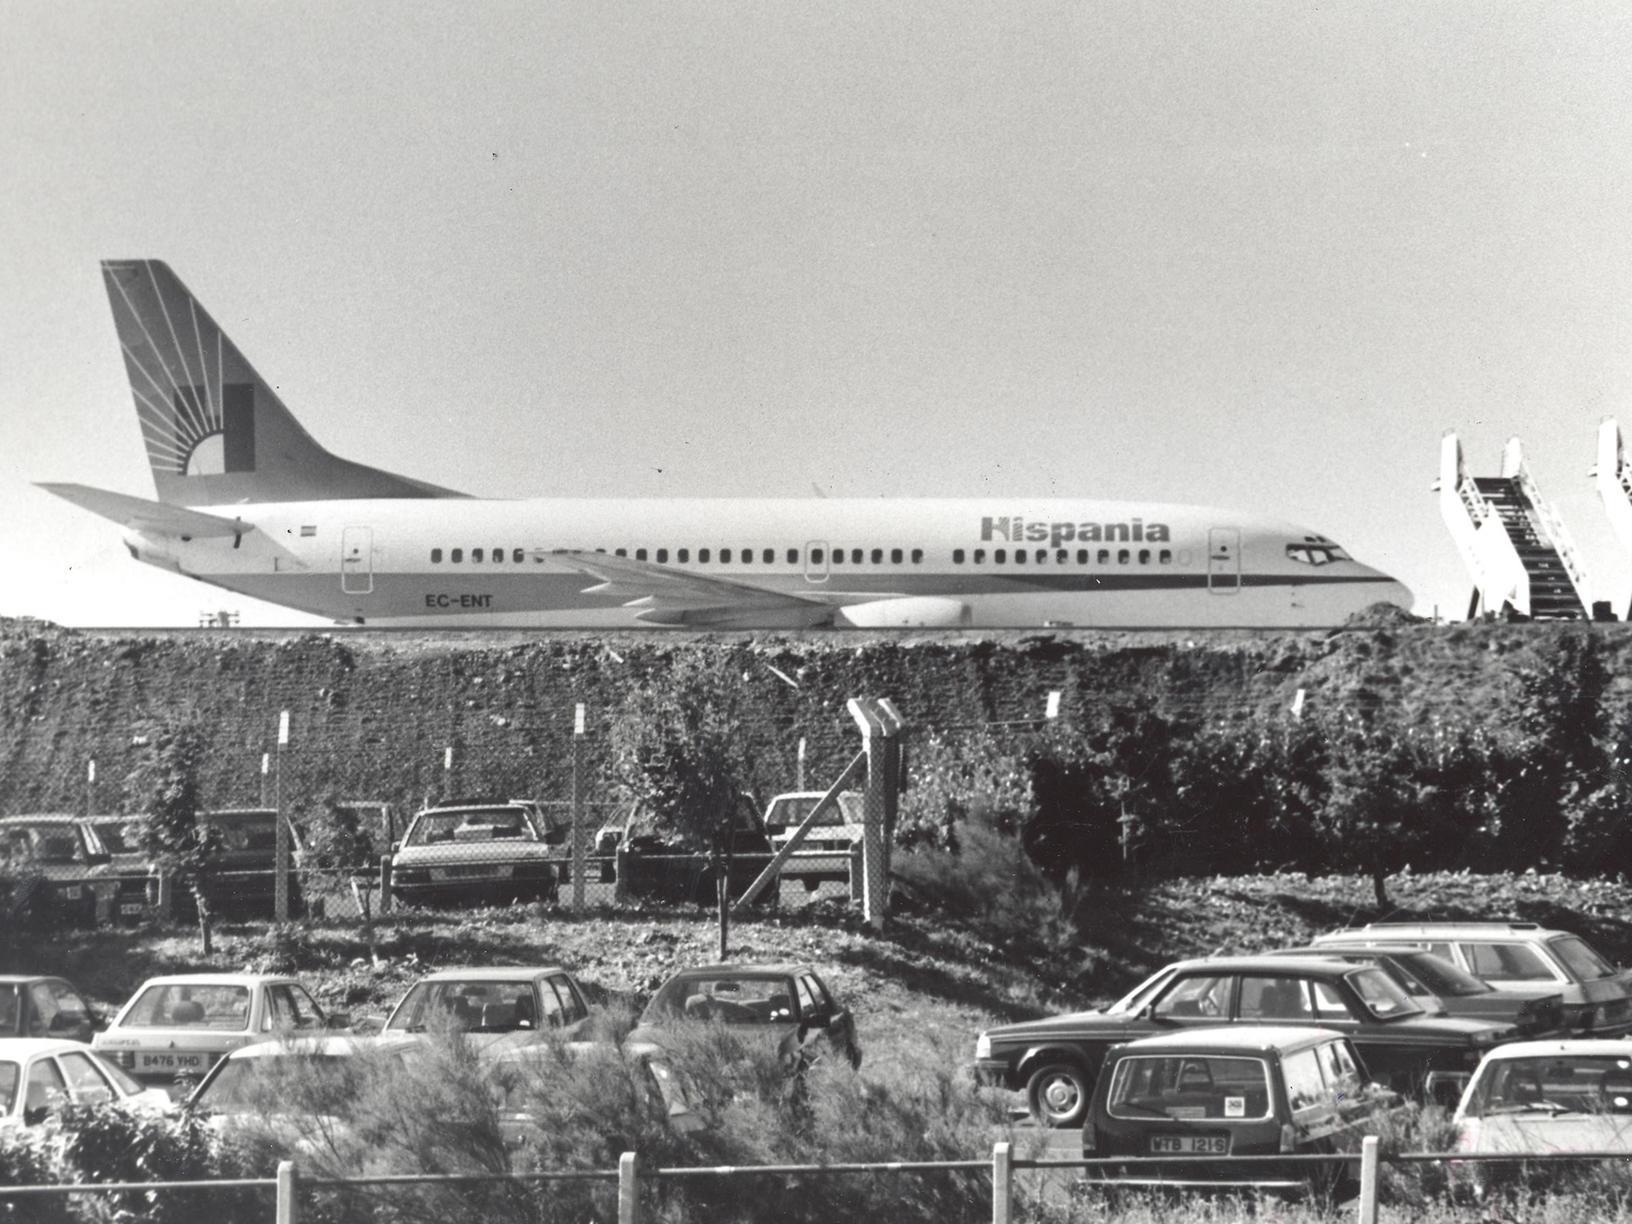 The plane was impounded at Leeds Bradford Airport and going nowhere in the summer of 1989.